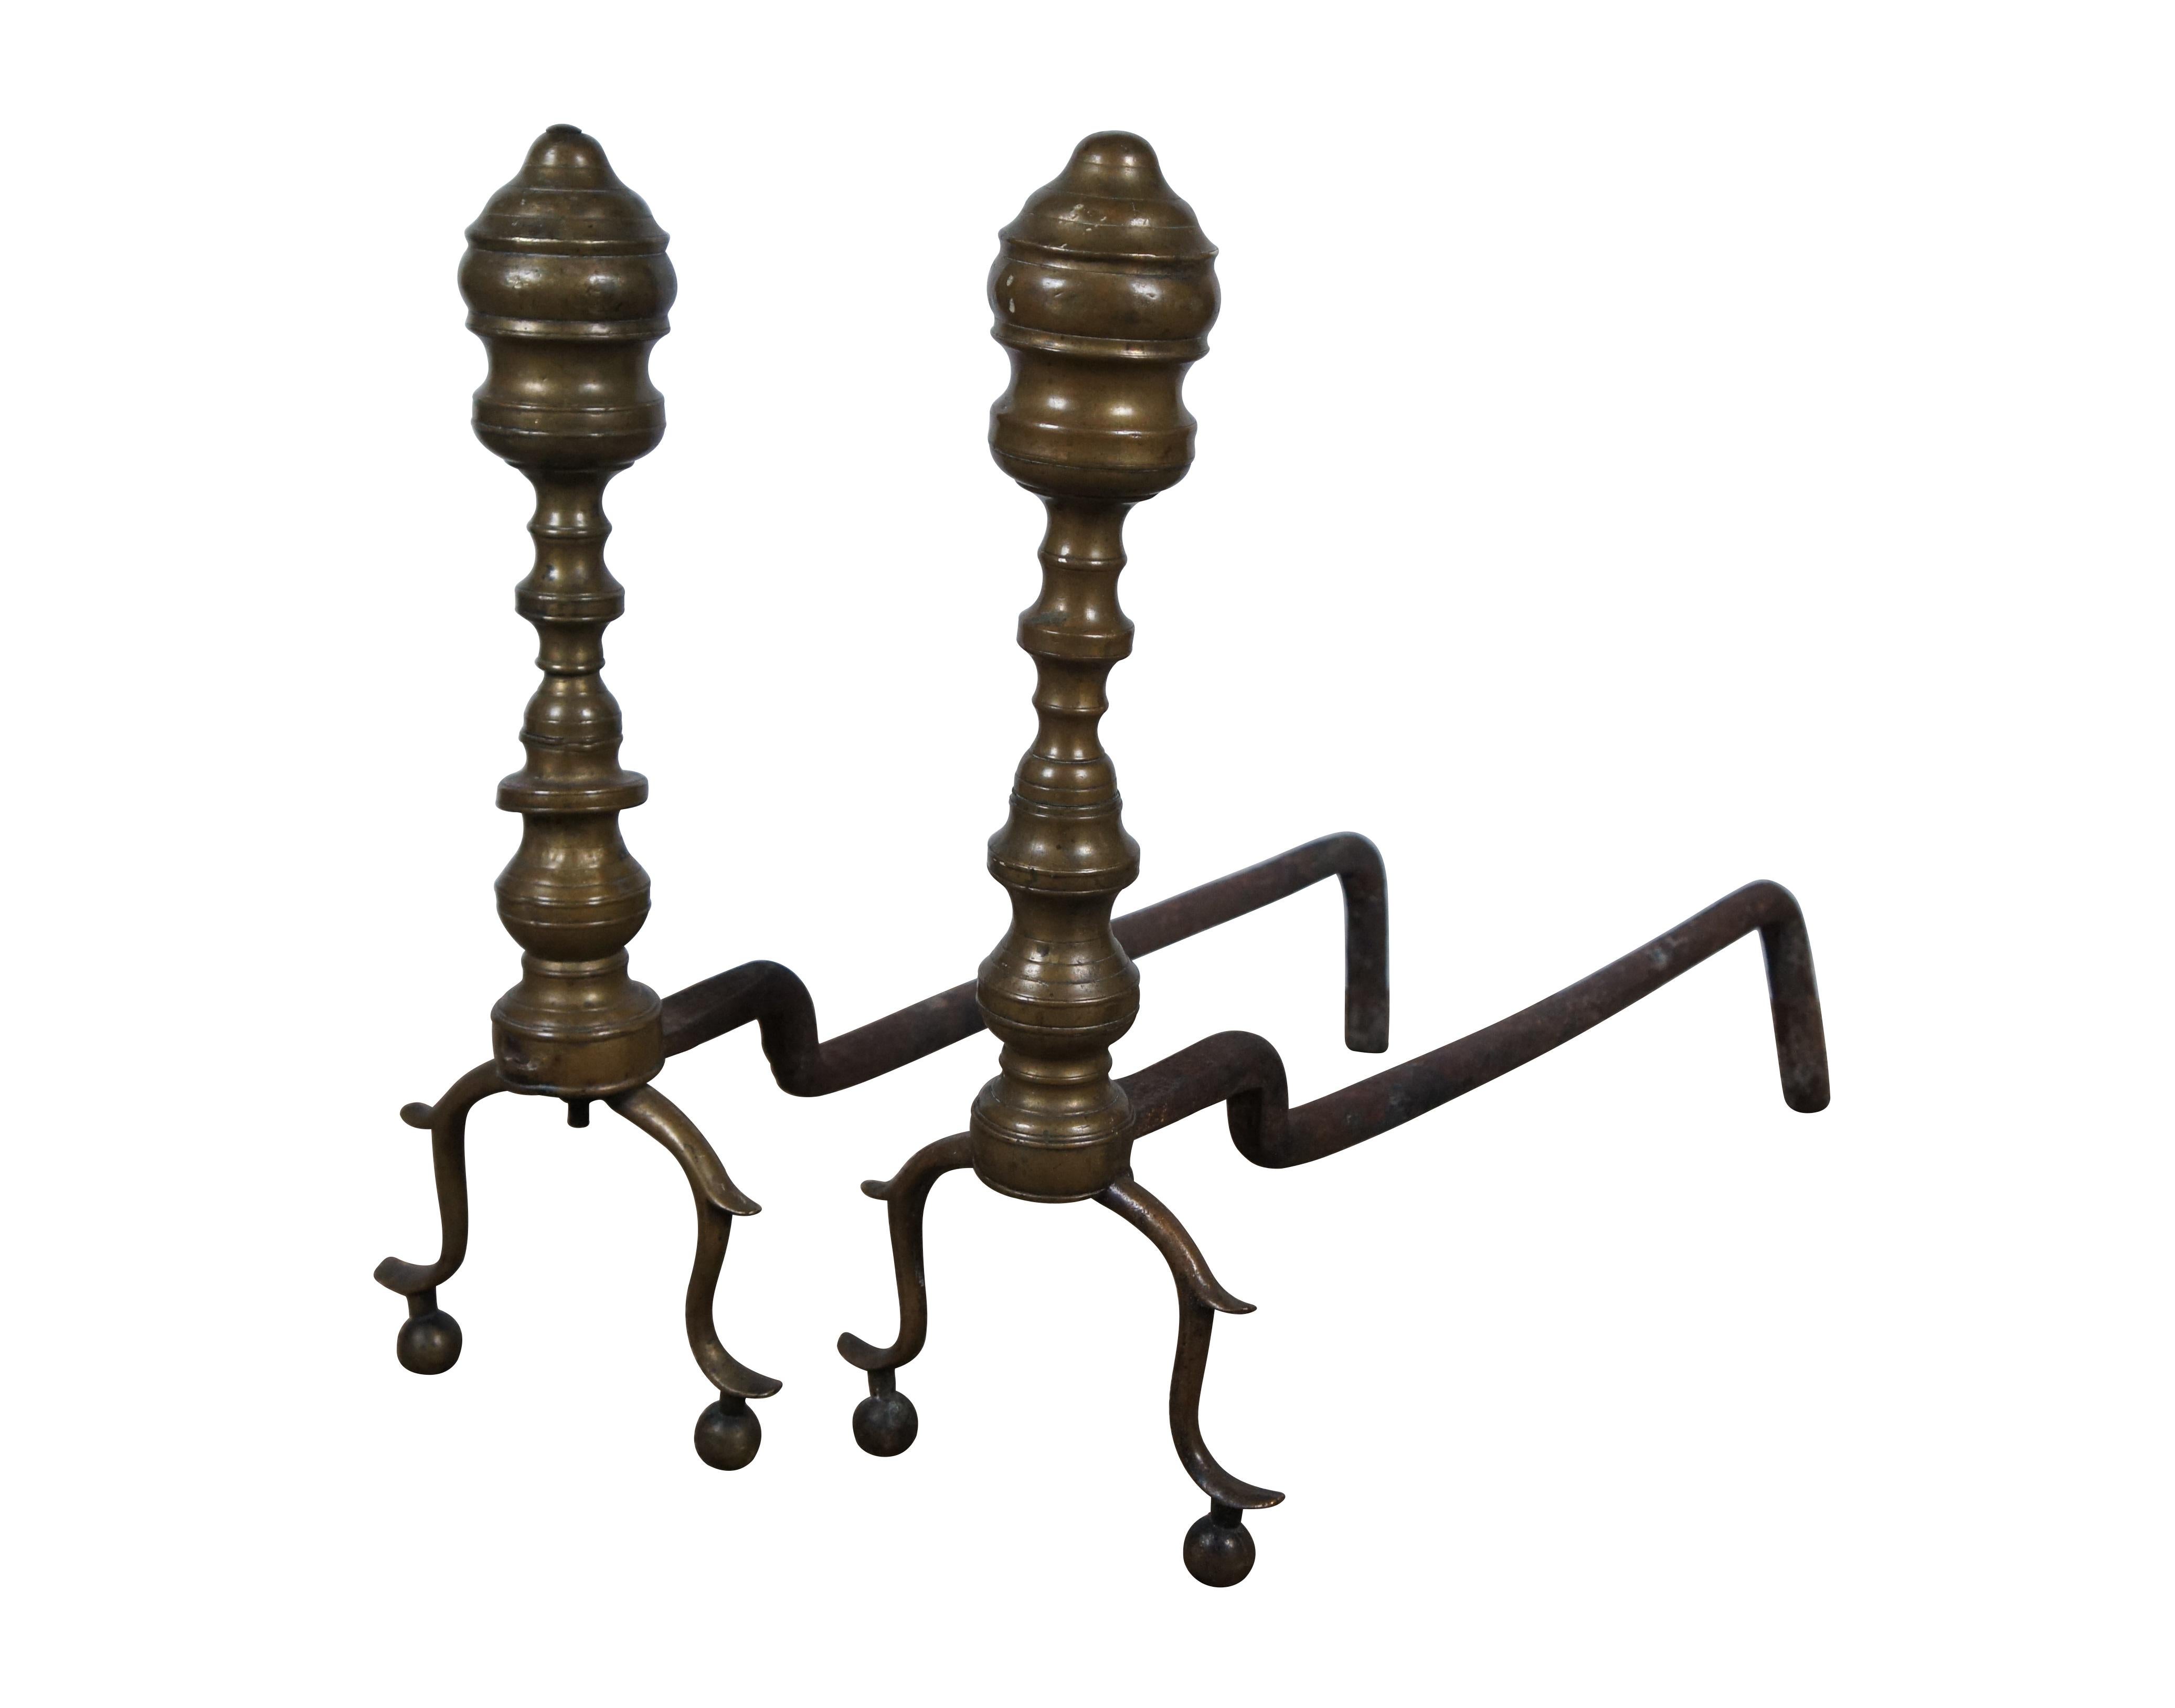 Pair of late 18th / early 19th century antique wrought iron and brass andirons / fire dogs featuring Colonial or Georgian styling with bow legs and a beehive shaped finial.

Dimensions:
6.75